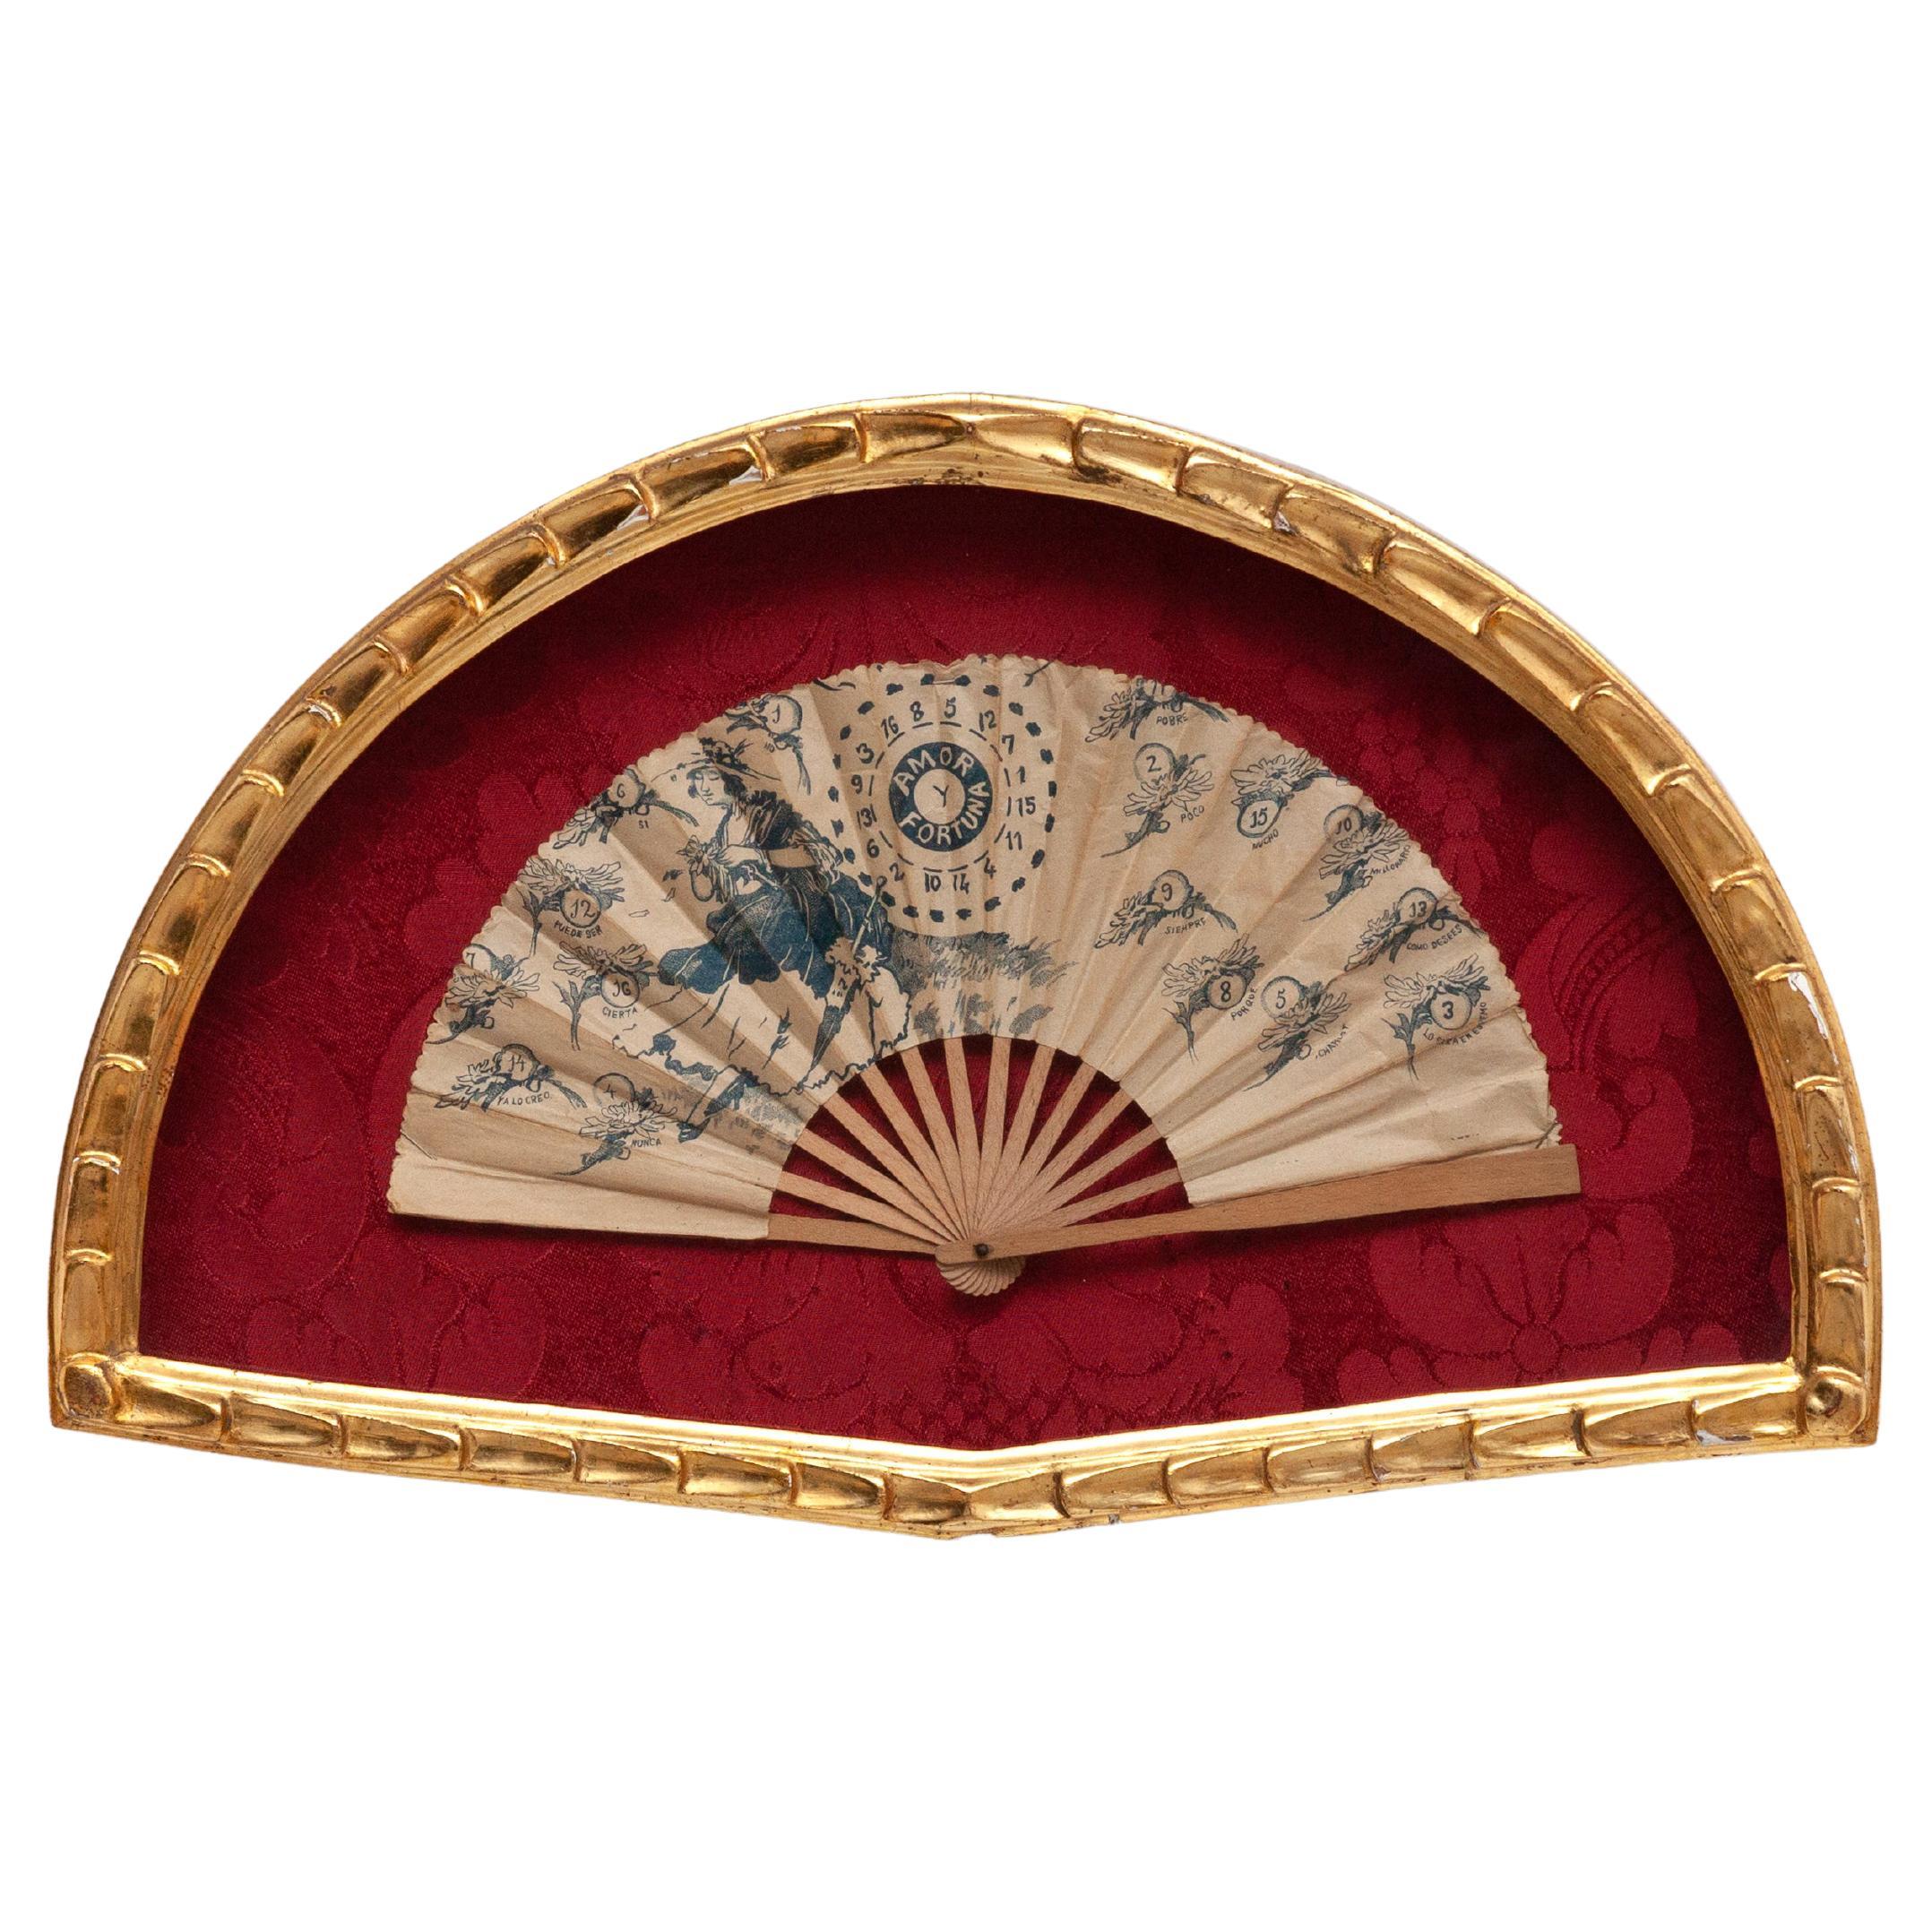 Traditional Spanish paper fan in a guilted frame circa 1920.

In original condition, with minor wear consistent of age and use, preserving a beautiful patina.

Material:
Paper.
 